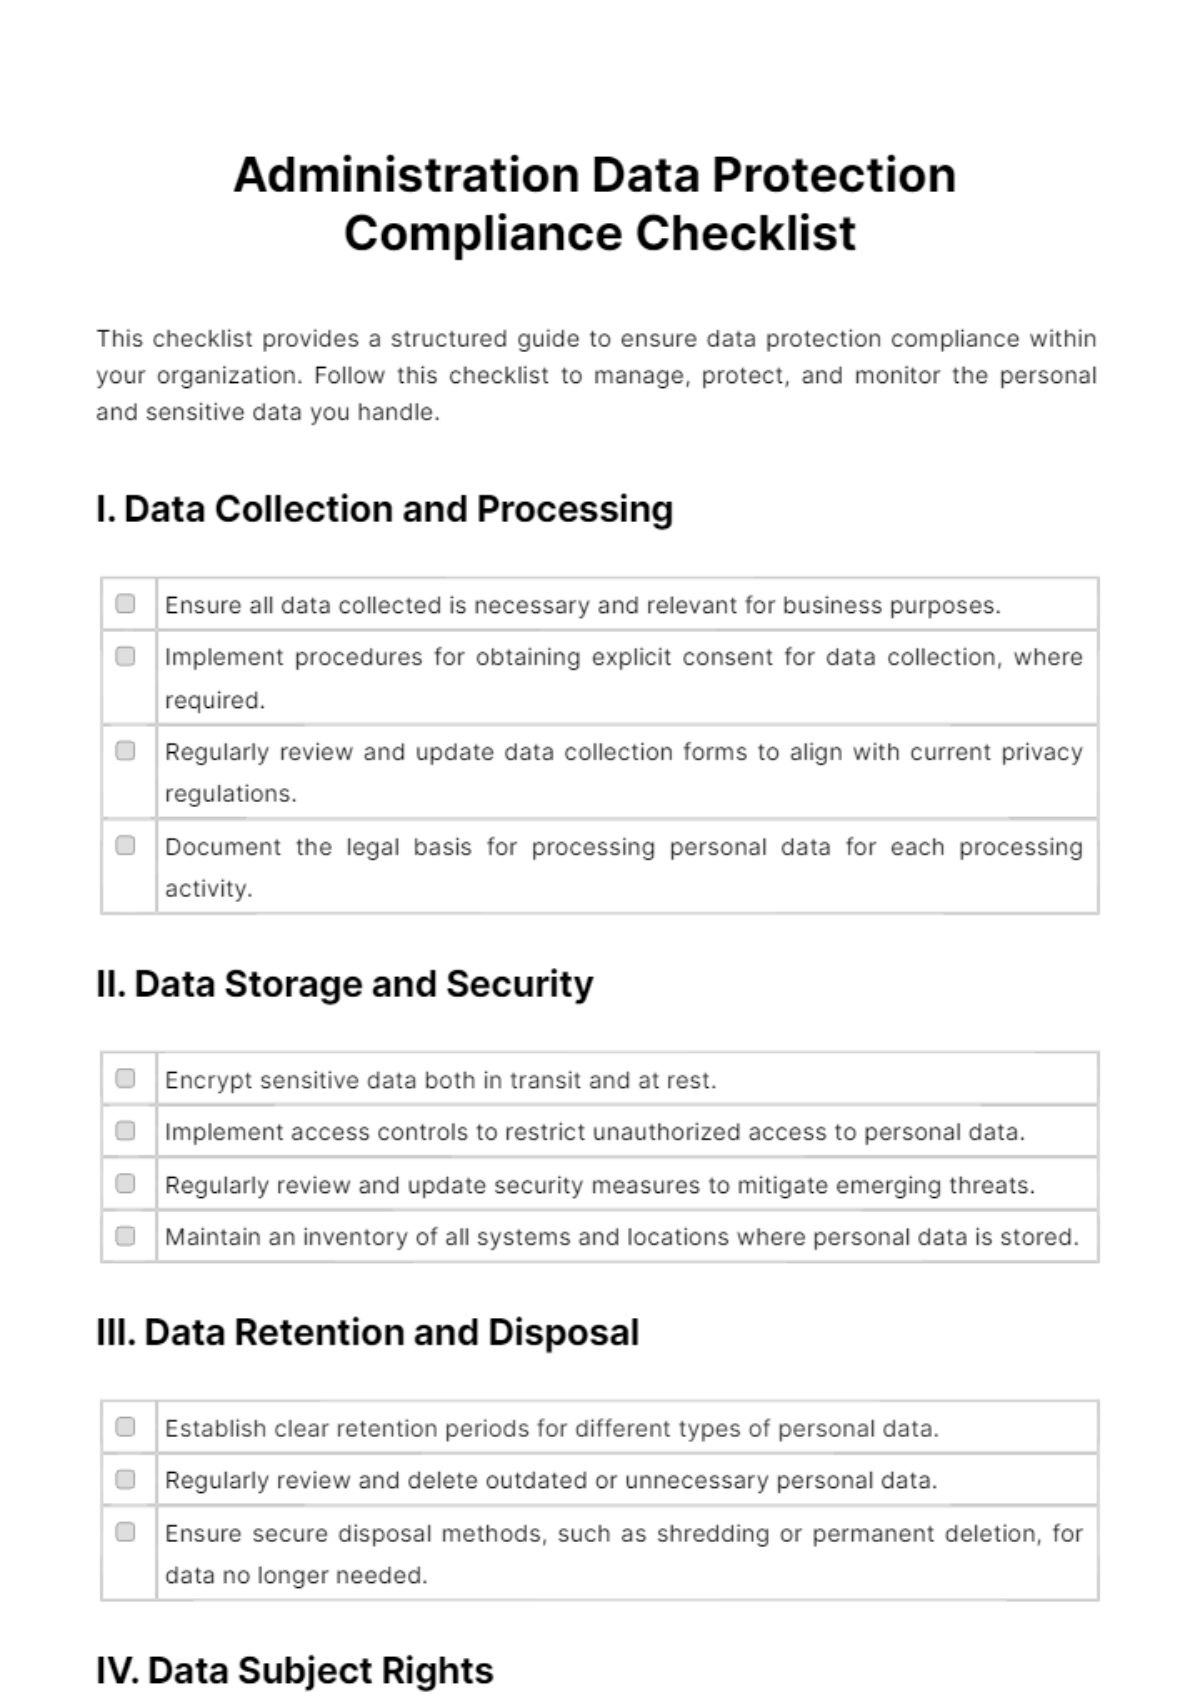 Administration Data Protection Compliance Checklist Template